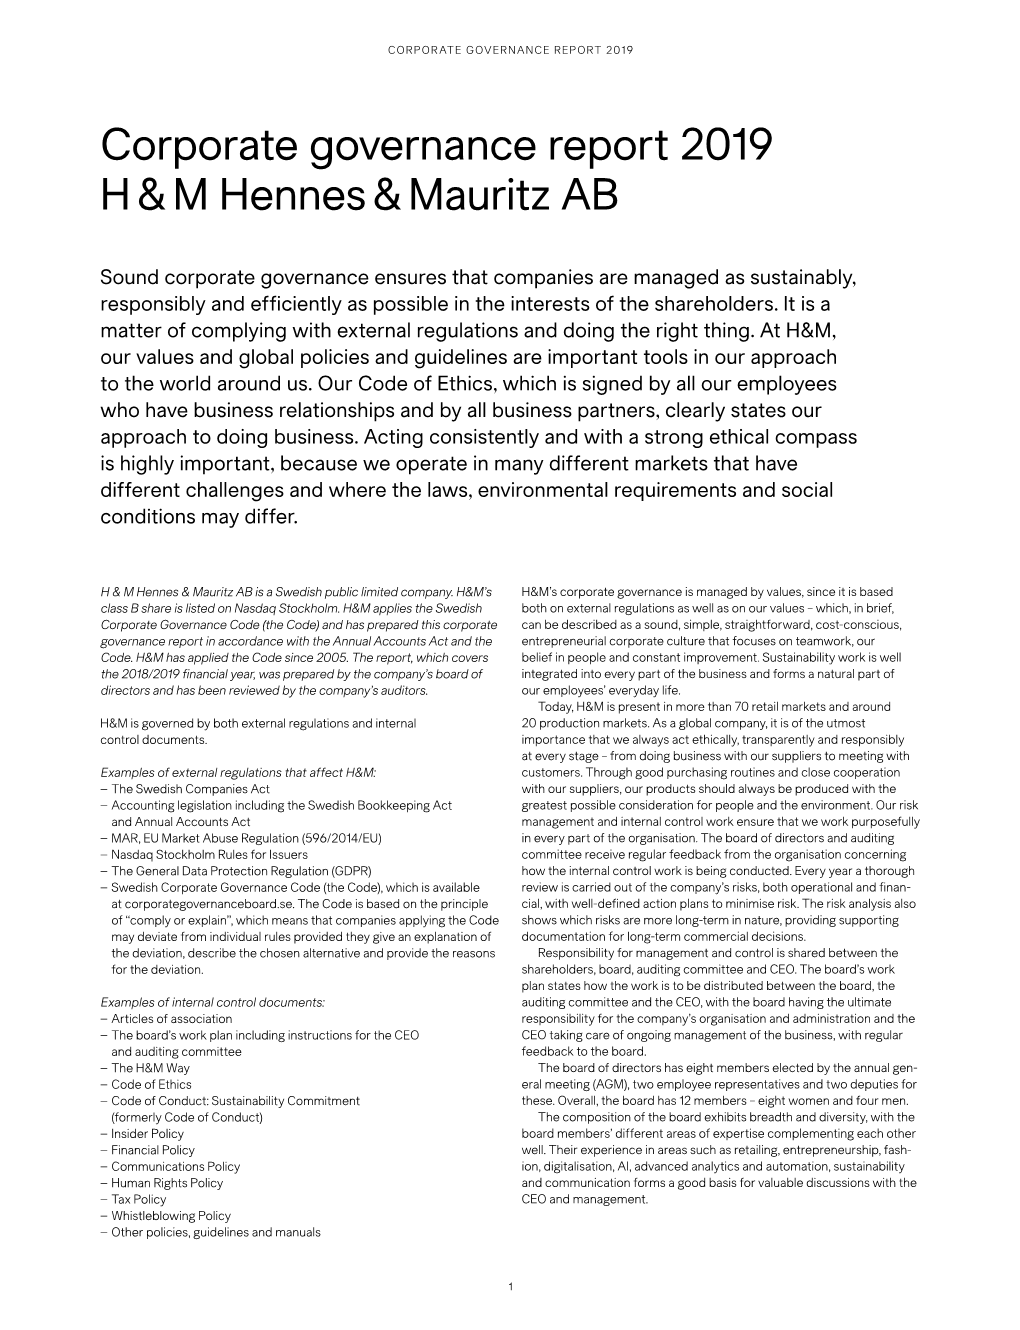 Corporate Governance Report 2019 H & M Hennes & Mauritz AB